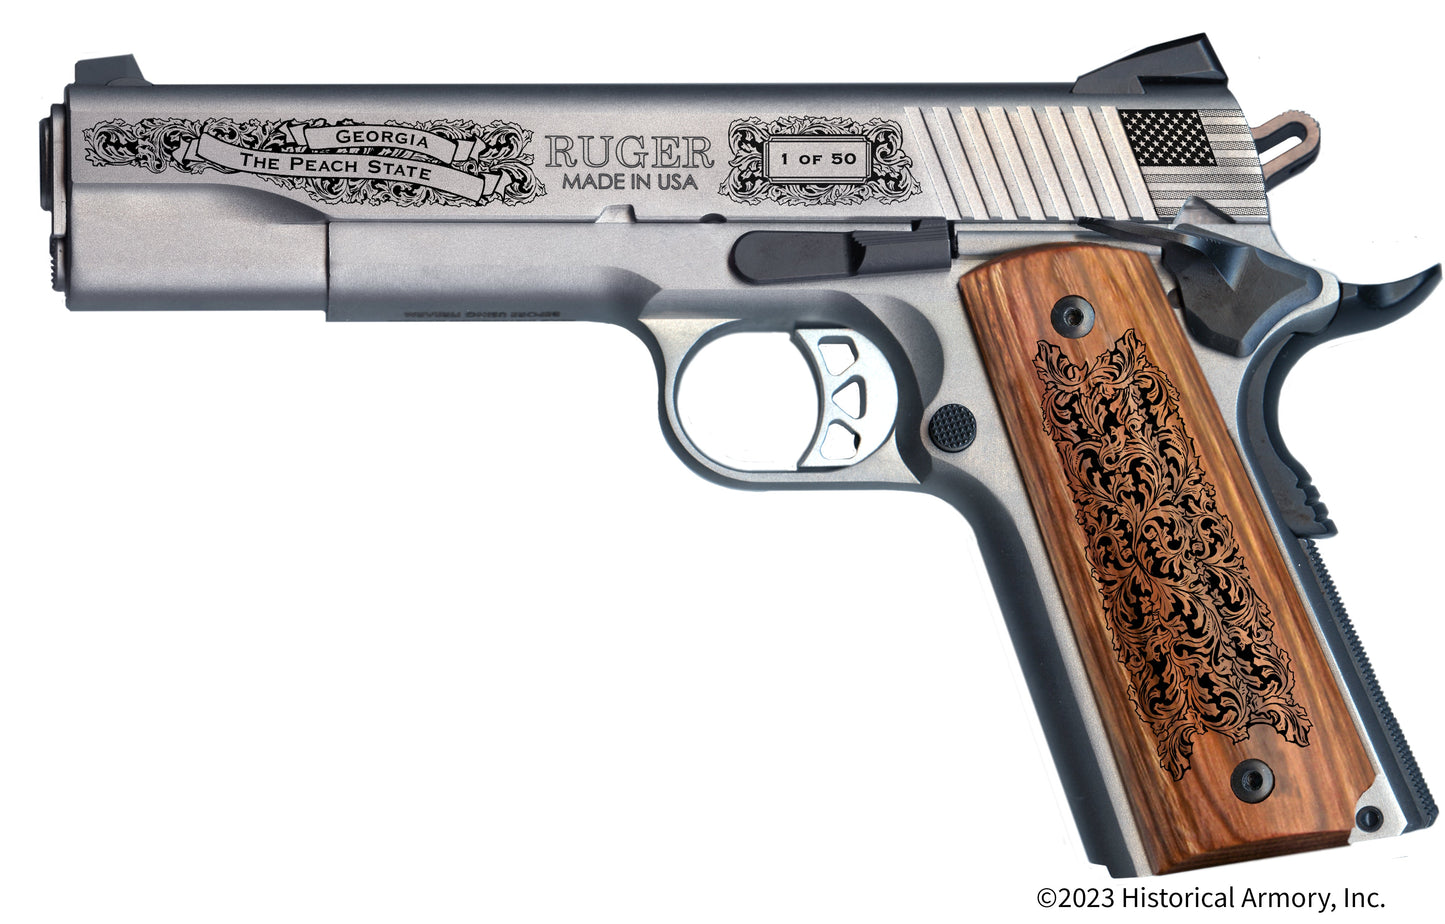 Colquitt County Georgia Engraved .45 Auto Ruger 1911